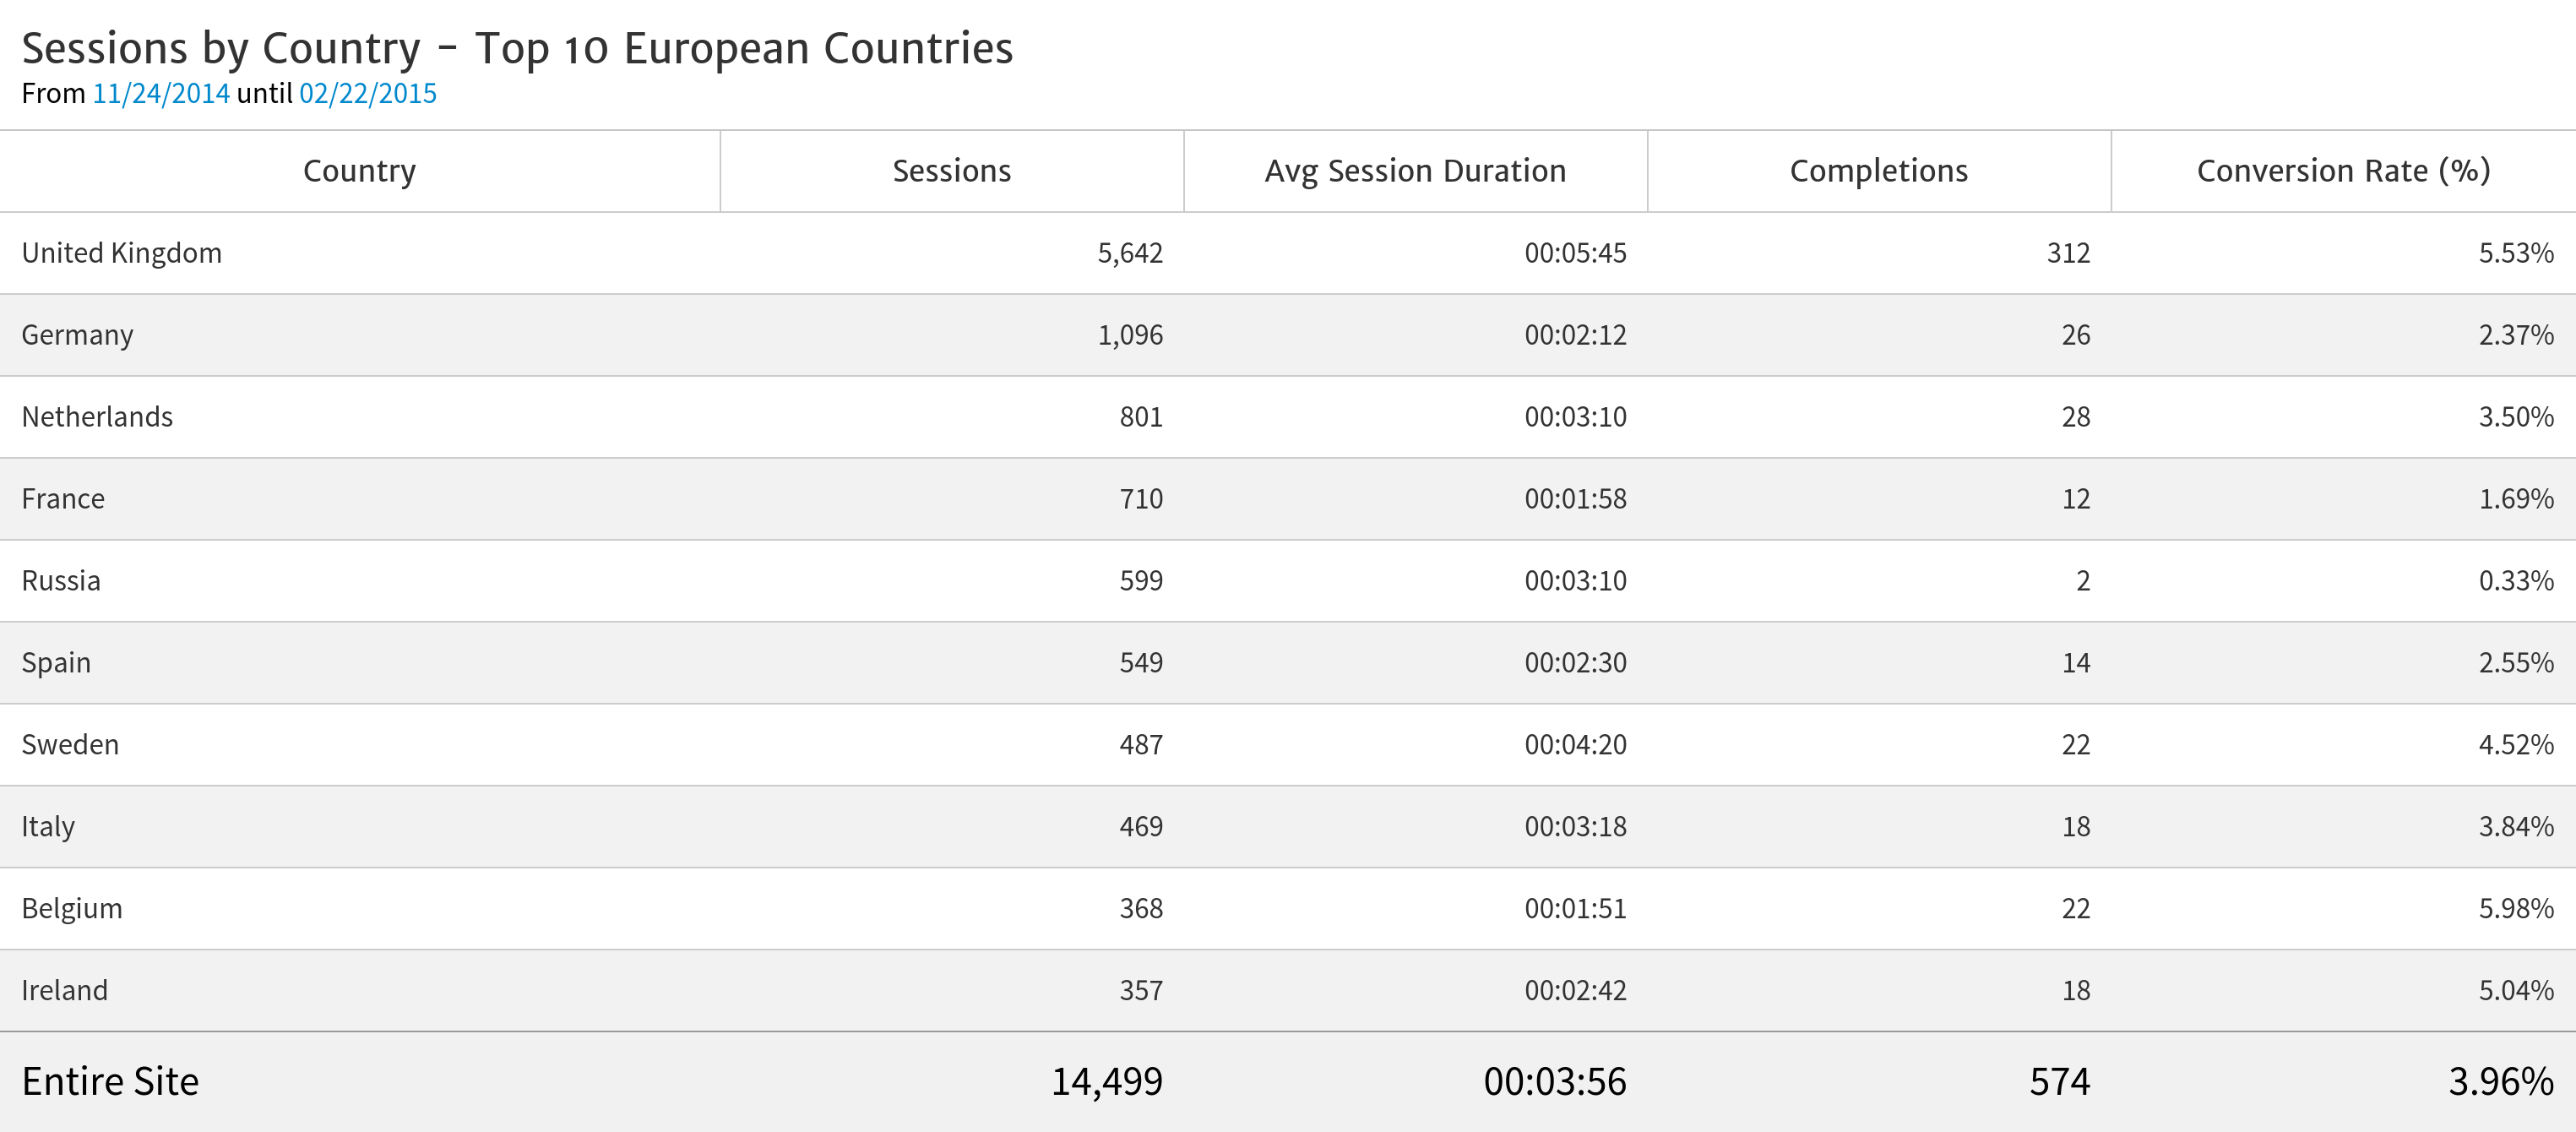 Web Traffic by Country in Europe - Table